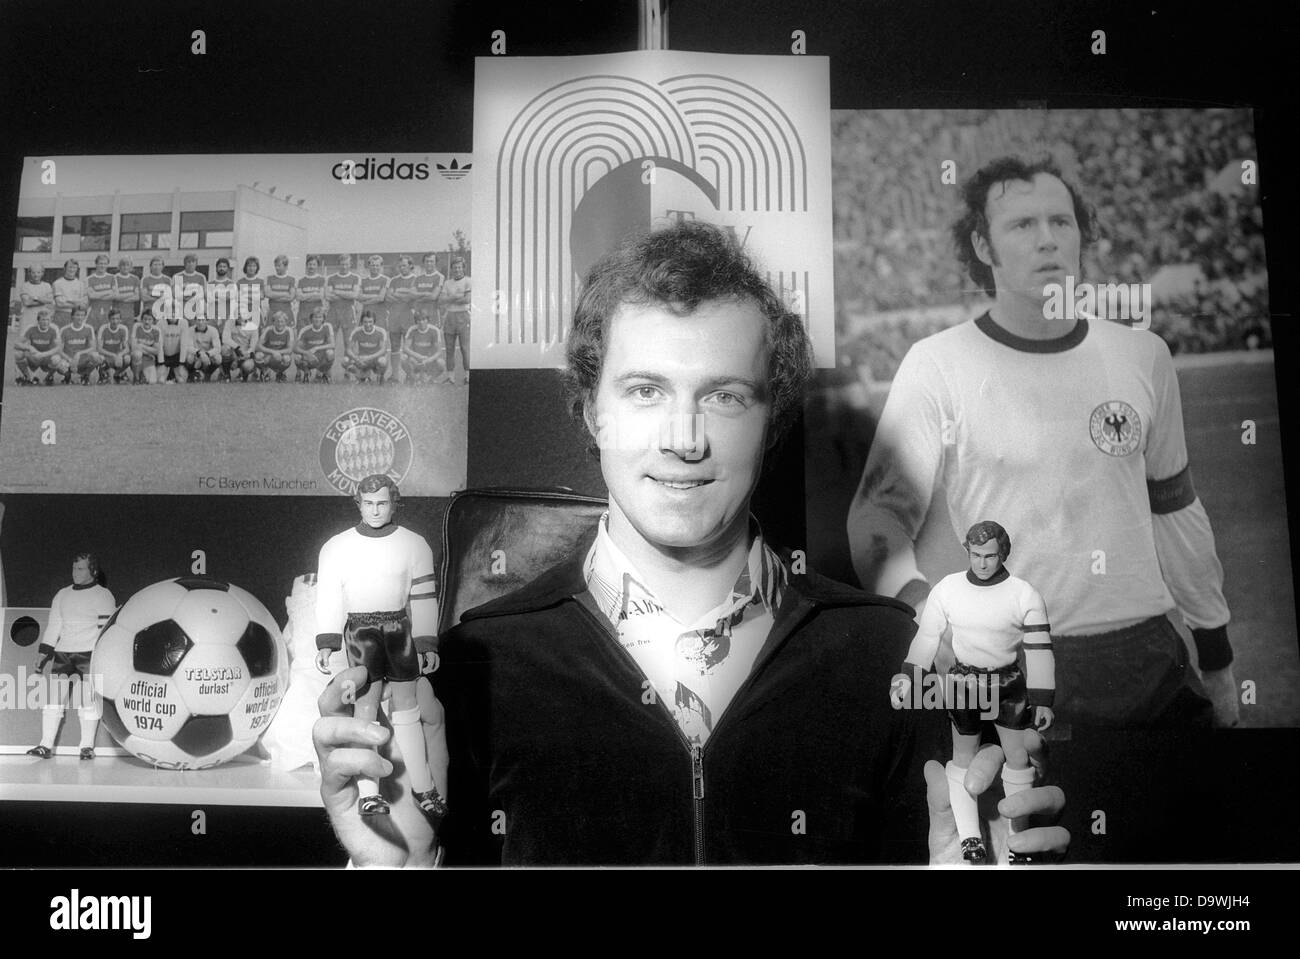 German soccer national player Franz Beckenbauer presents two toy puppets in soccer dress at the toy fair in Nuremberg on the 9th of February in 1977. Stock Photo